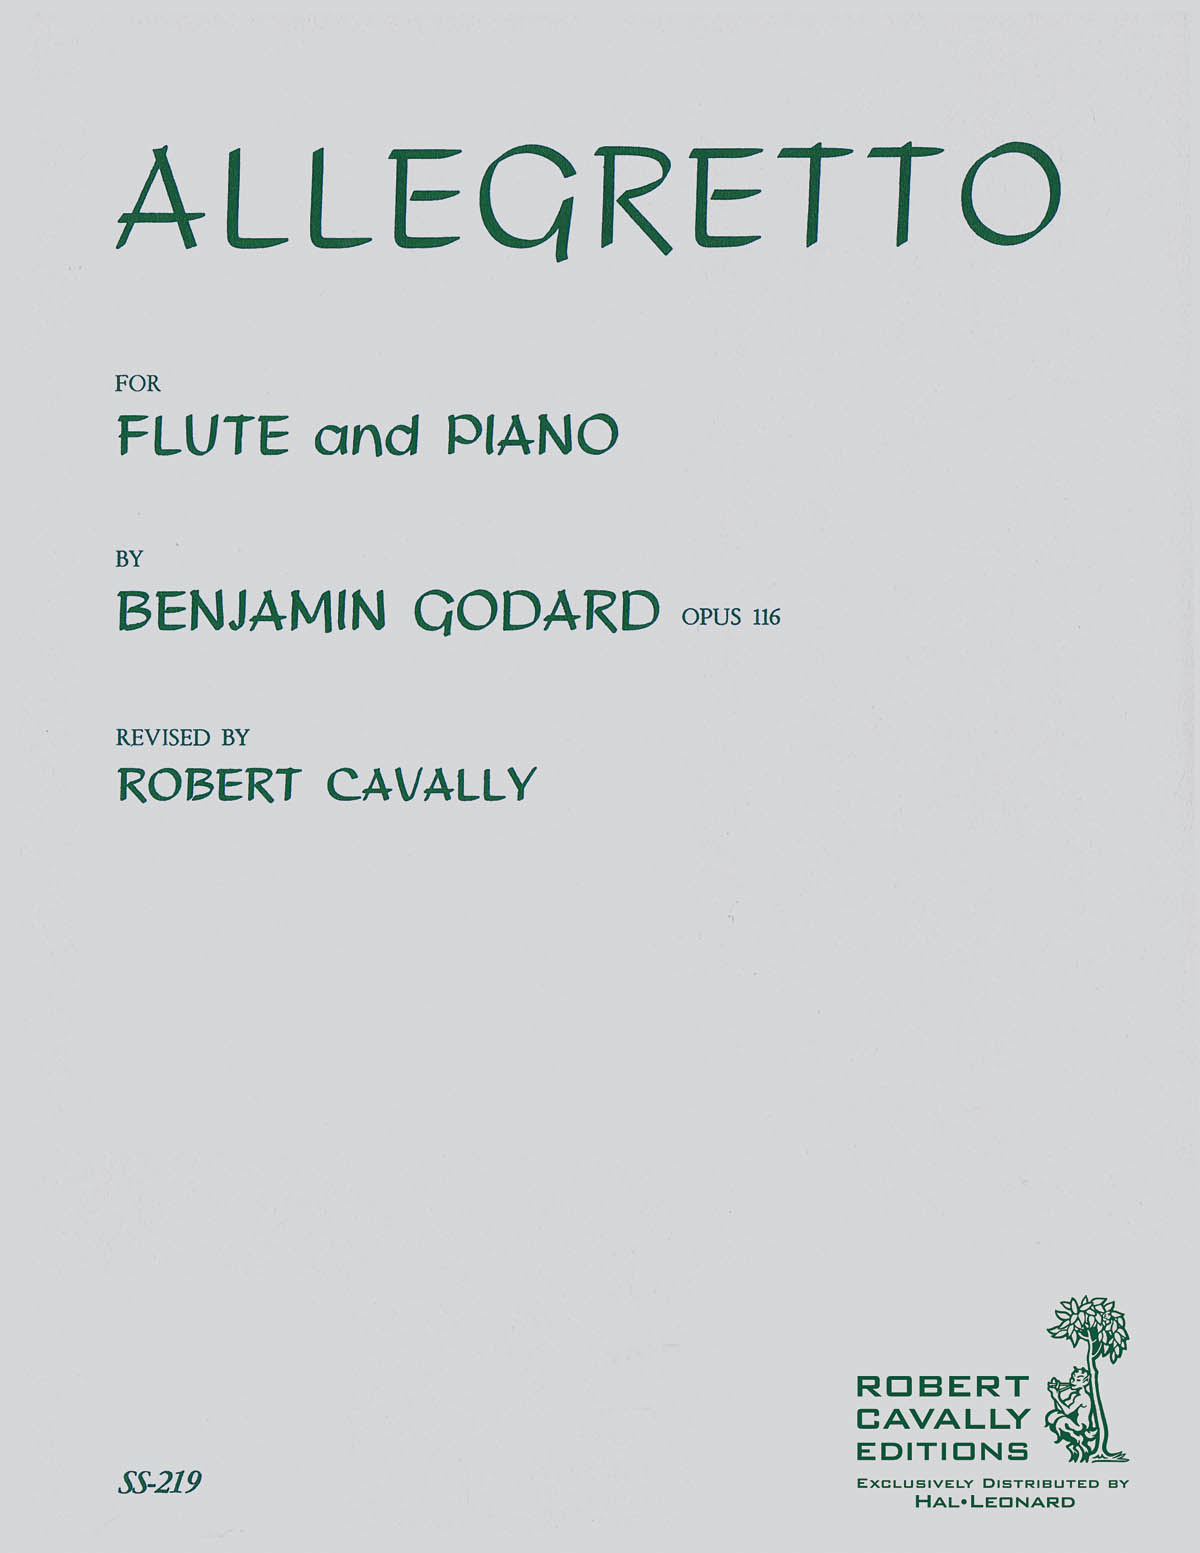 Benjamin Goard: Allegretto from Suite in Bb for Flute and Orch. Opus 116